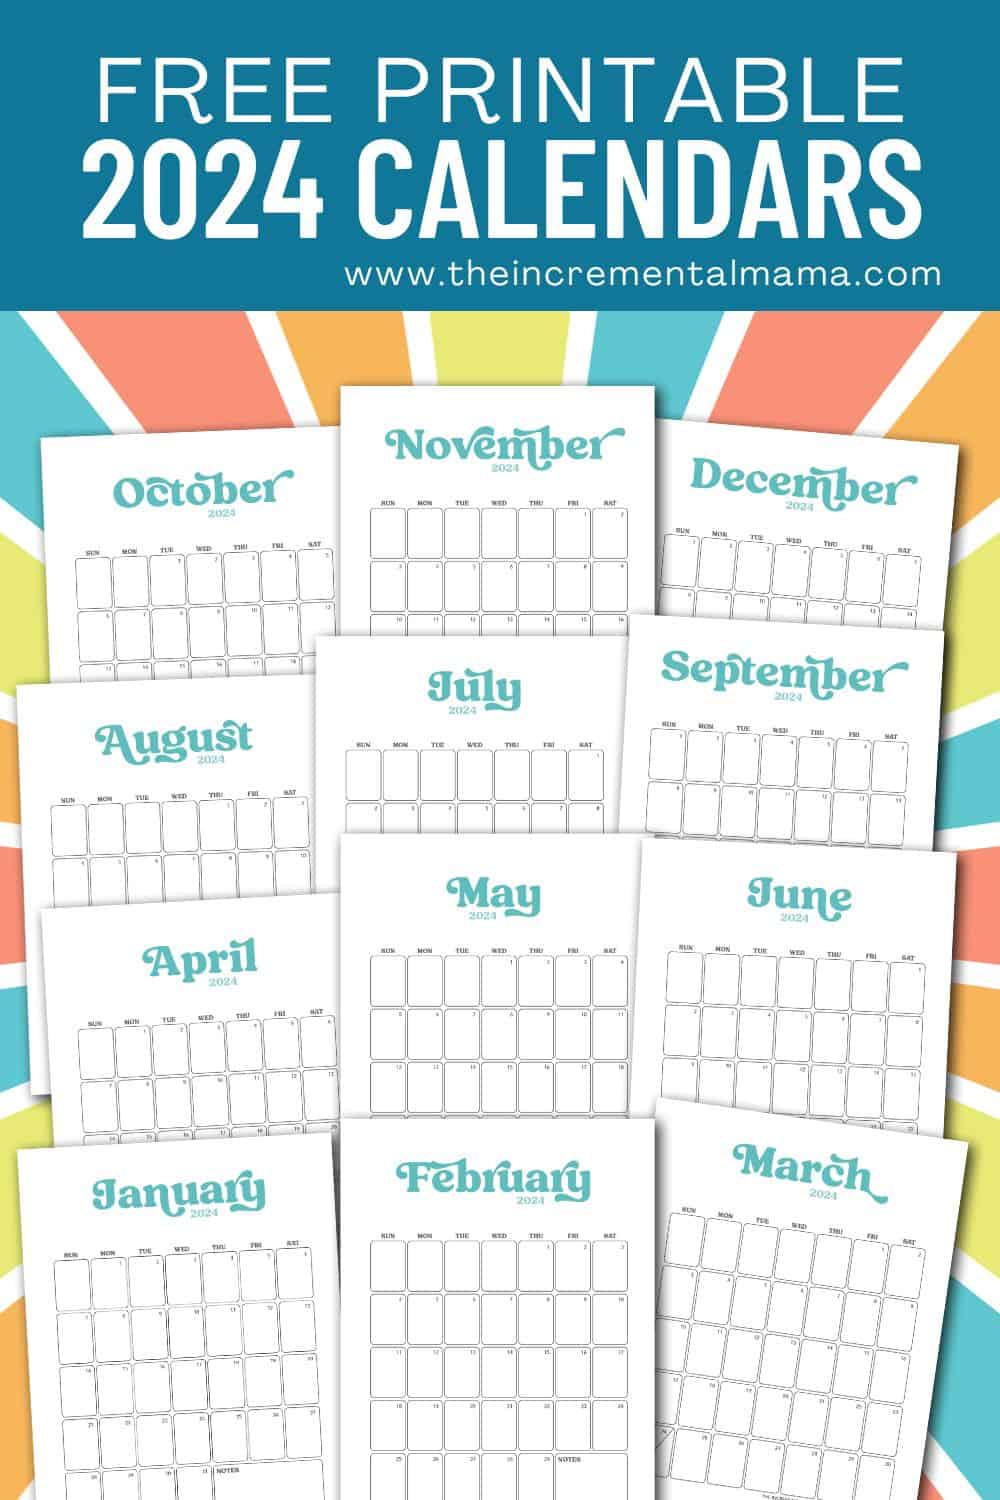 Fun Retro-Inspired 2024 Monthly Calendar PDFs (12 Free Printables)